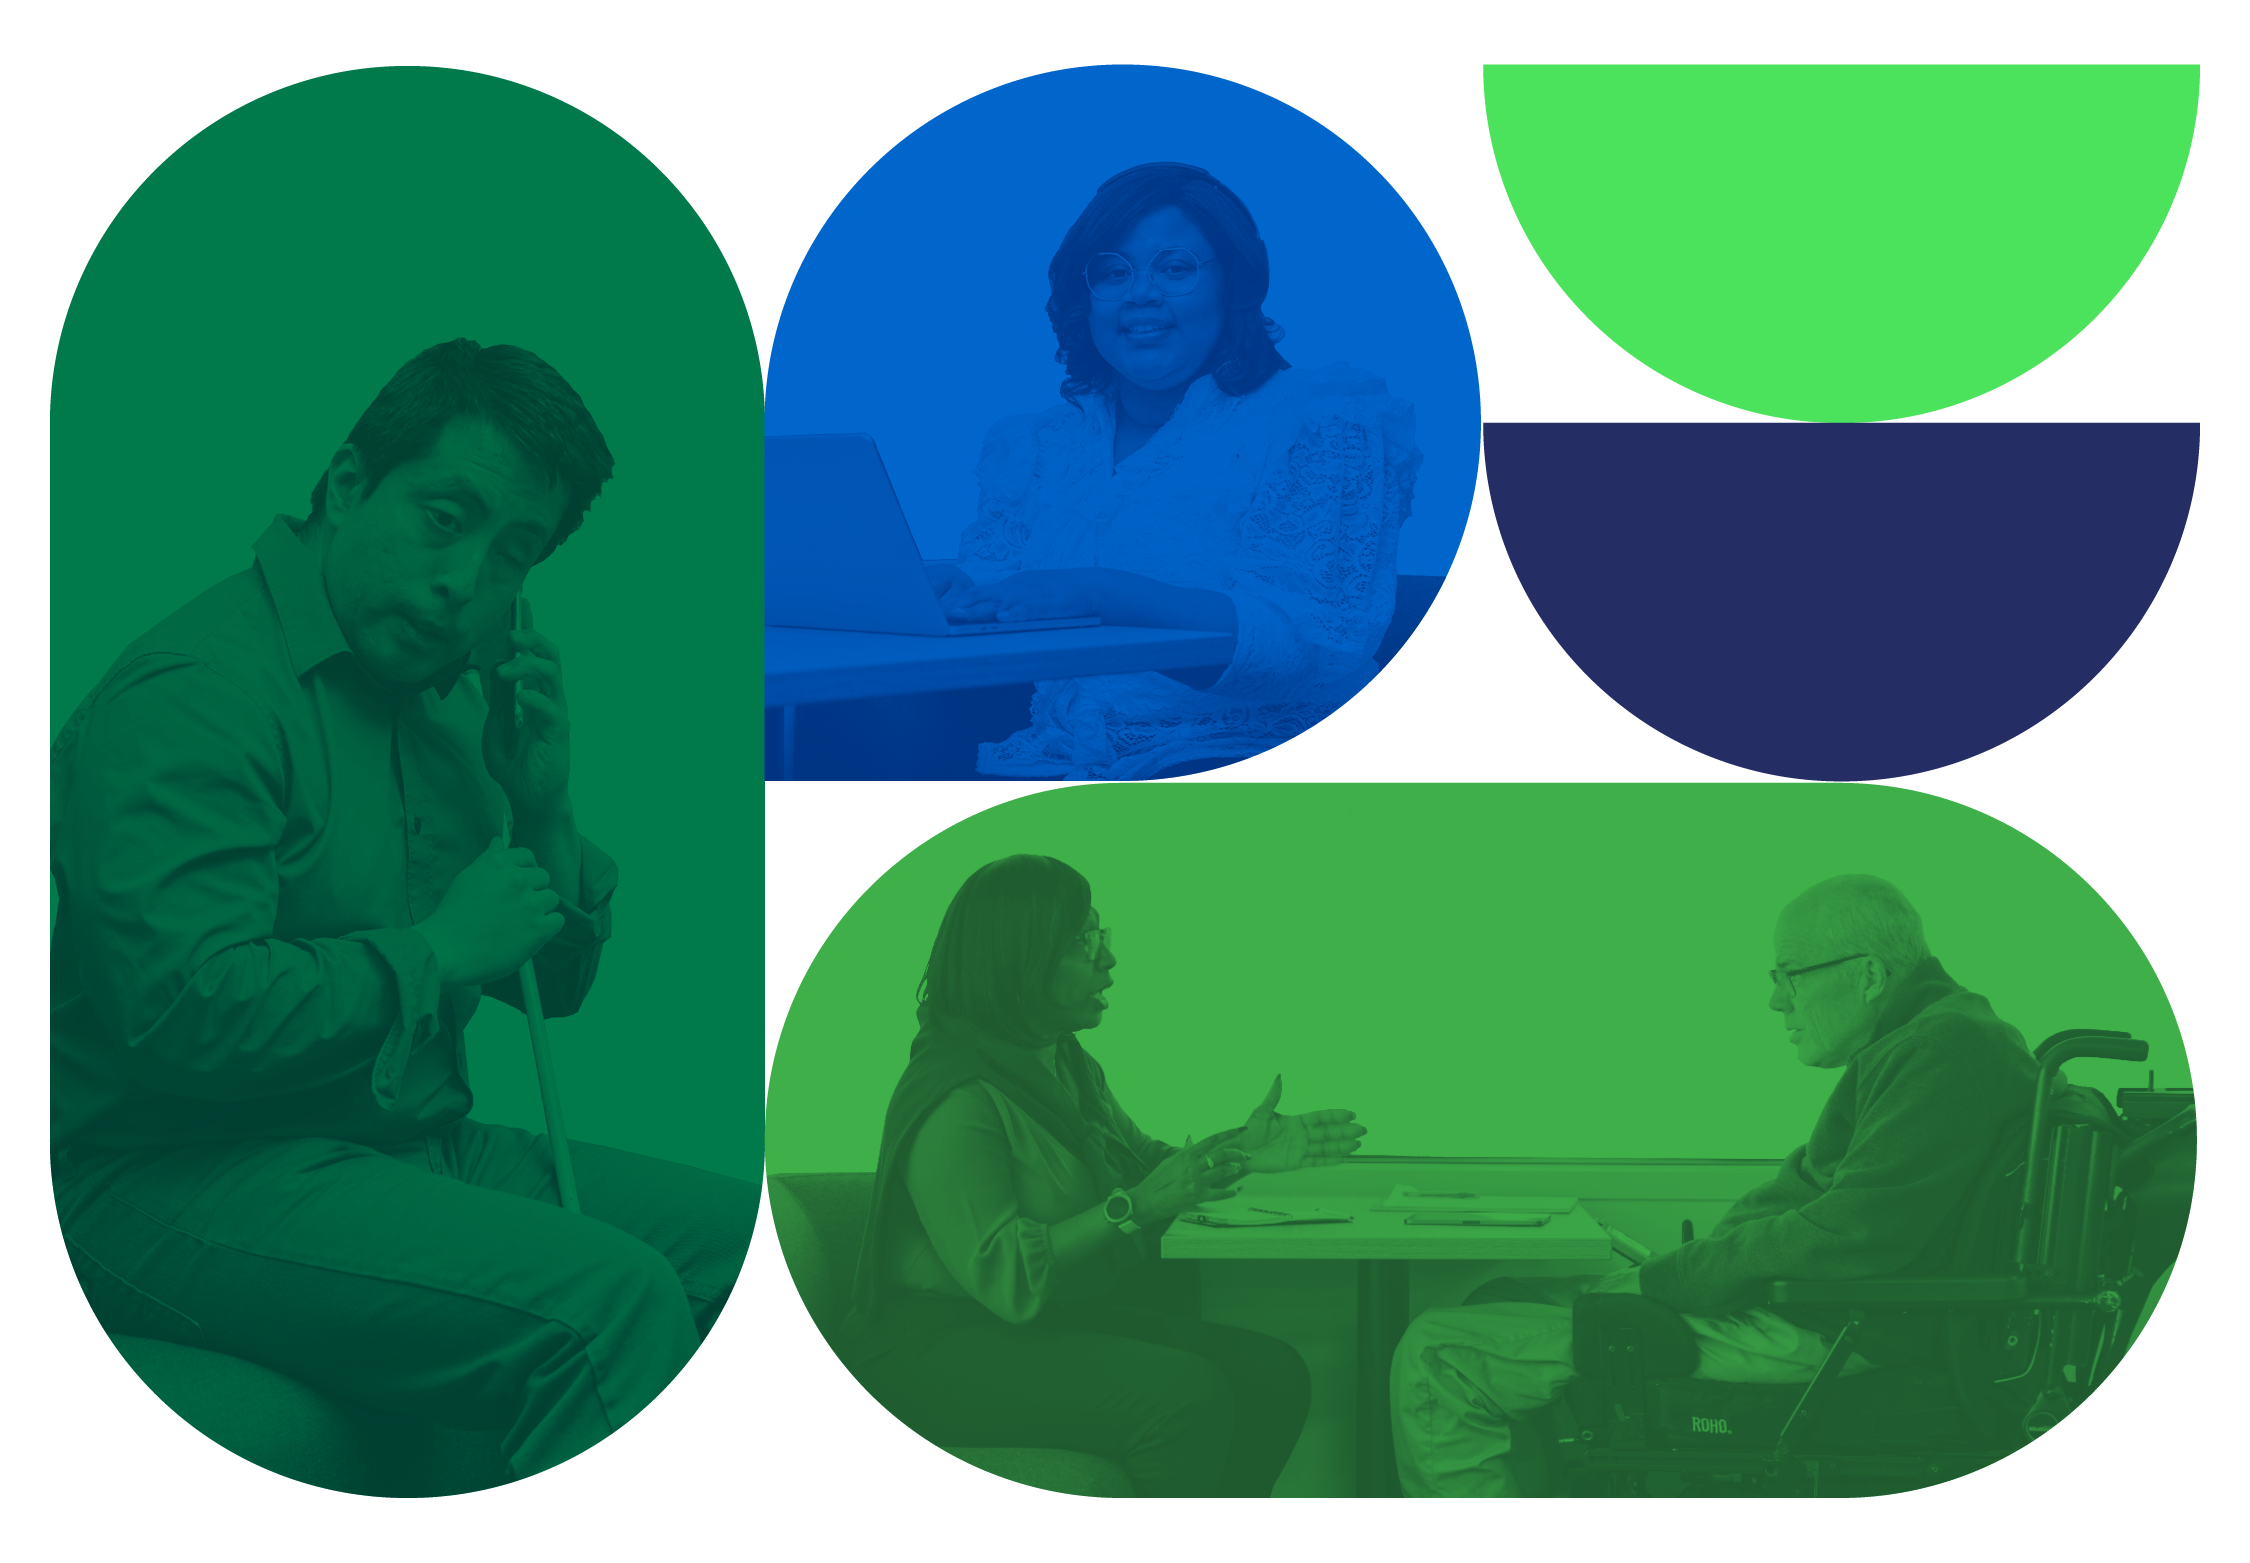 Various round shapes in blues and greens stacked in tetris style, with each shape showing a business professional with a disability engaging with technology and others.